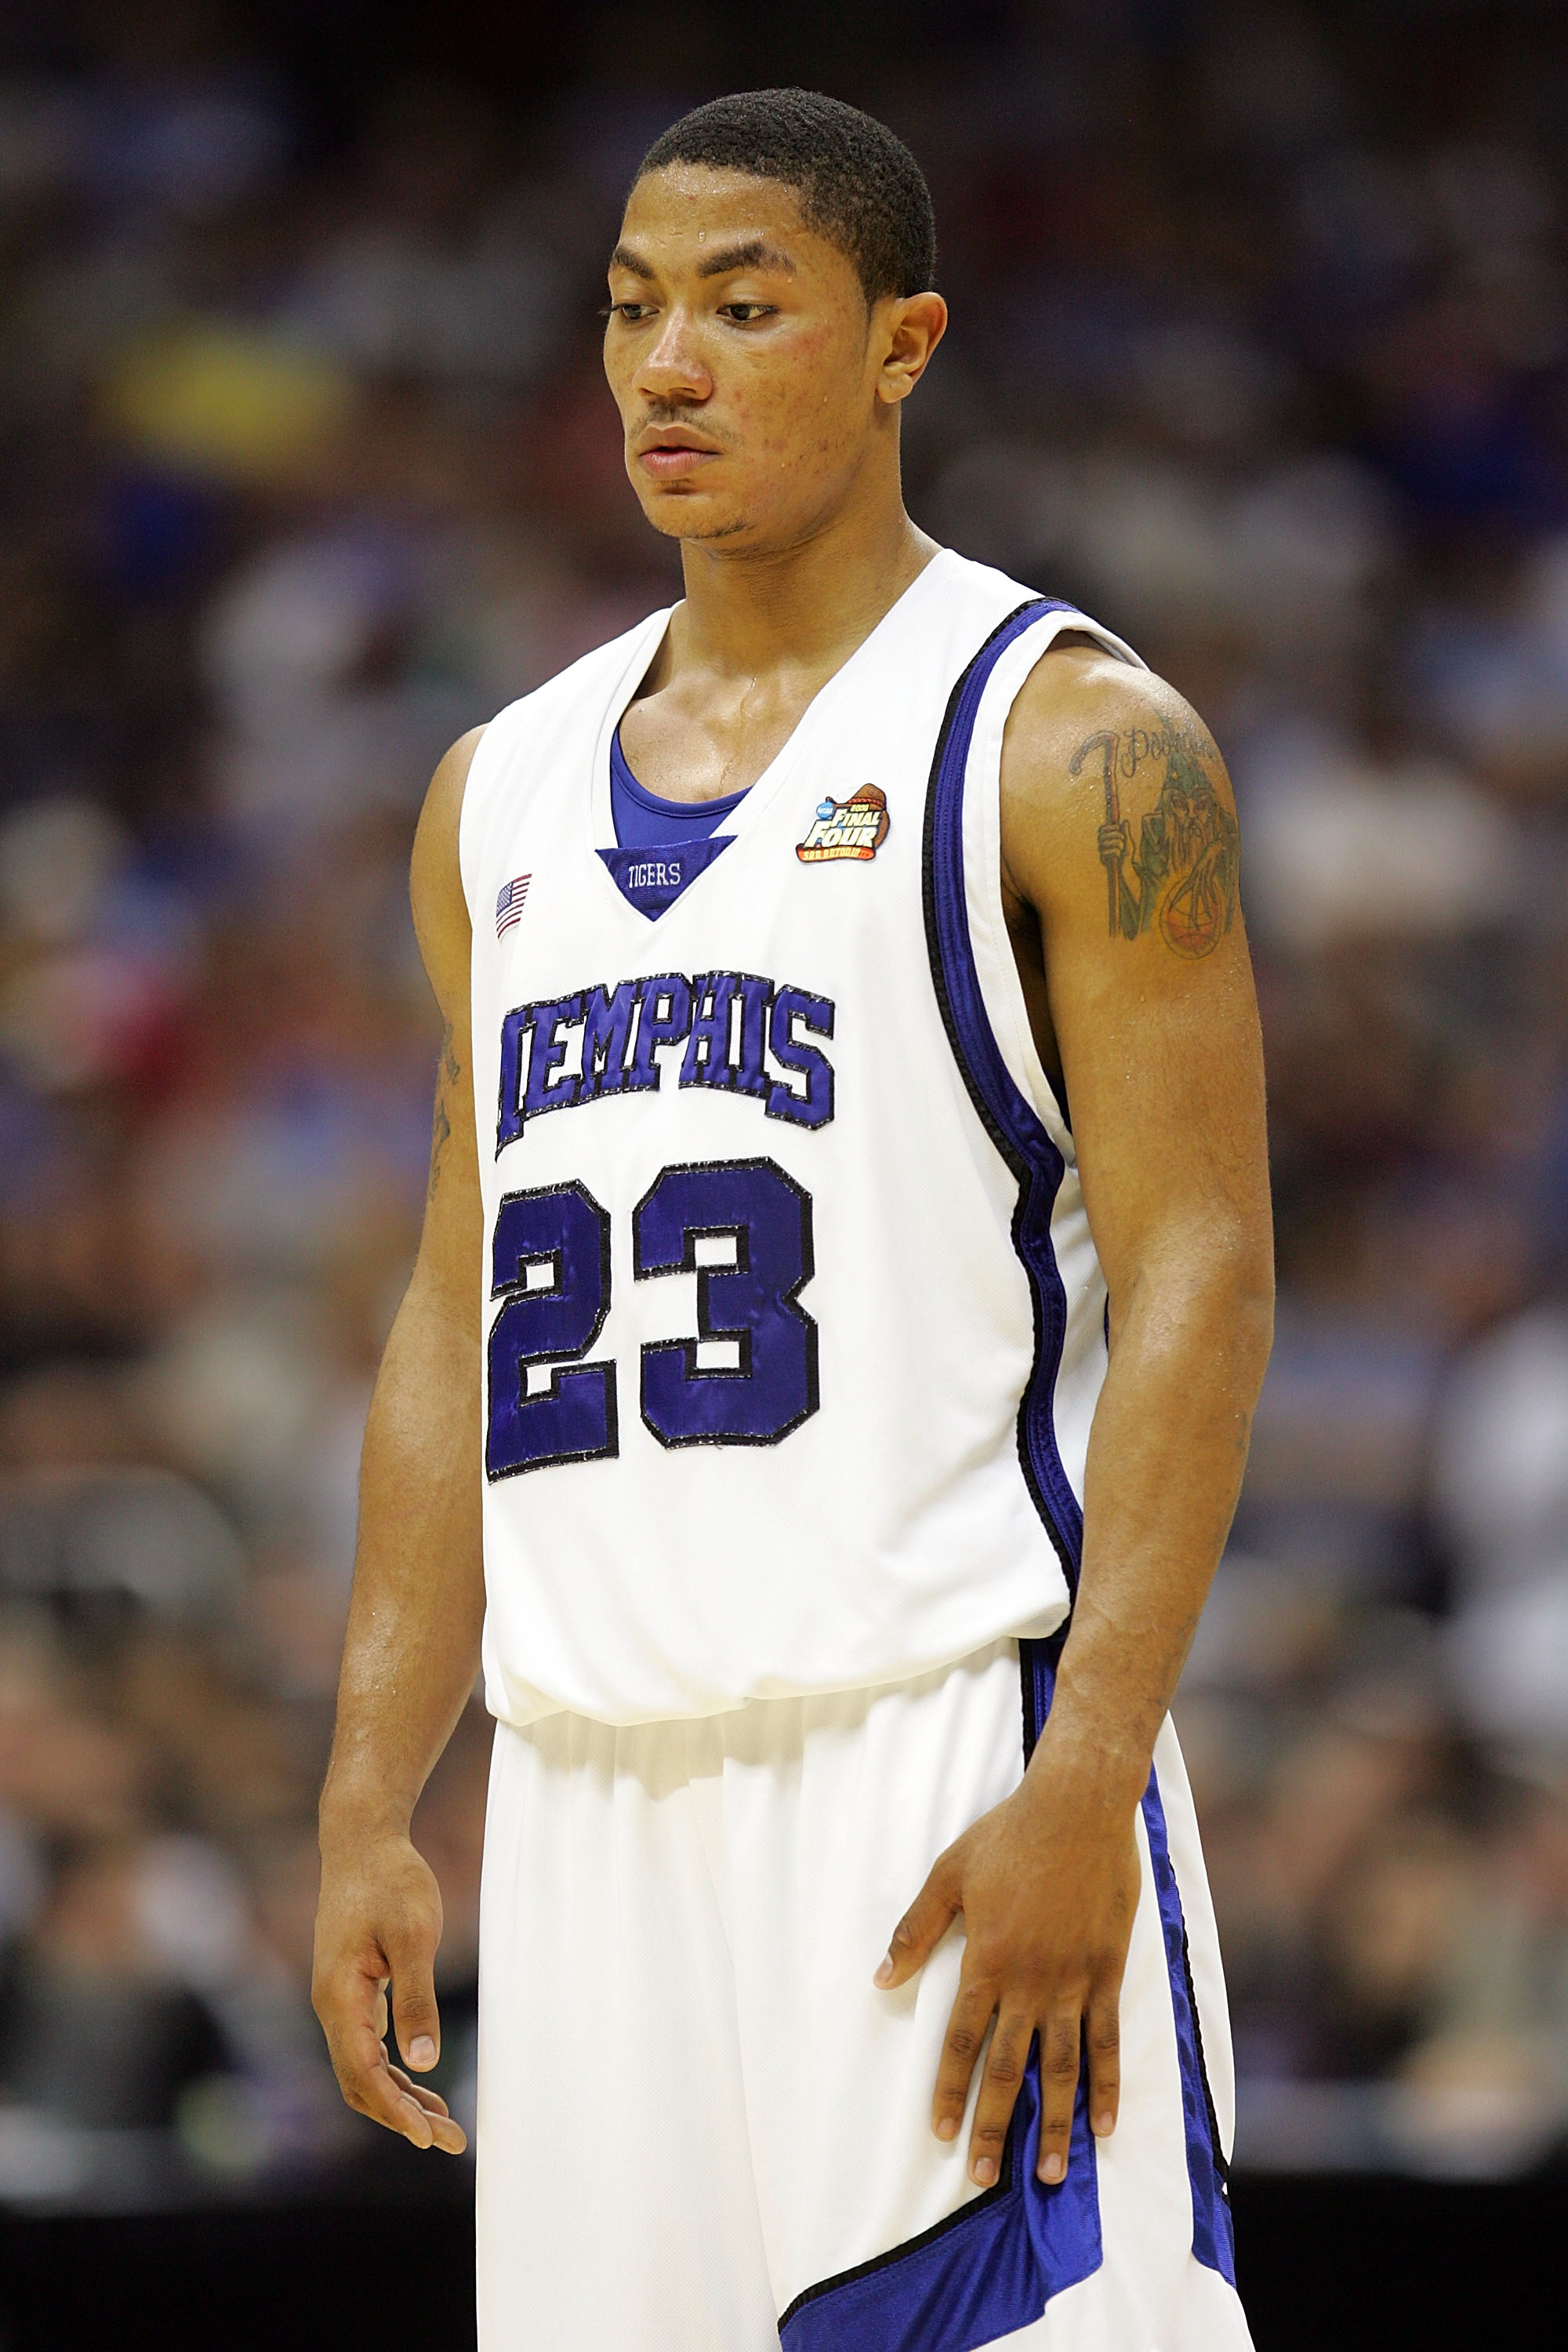 SAN ANTONIO - APRIL 07:  Derrick Rose #23 of the Memphis Tigers looks down in the final minutes of overtime against the Kansas Jayhawks during the 2008 NCAA Men's National Championship game at the Alamodome on April 7, 2008 in San Antonio, Texas.  The Jay